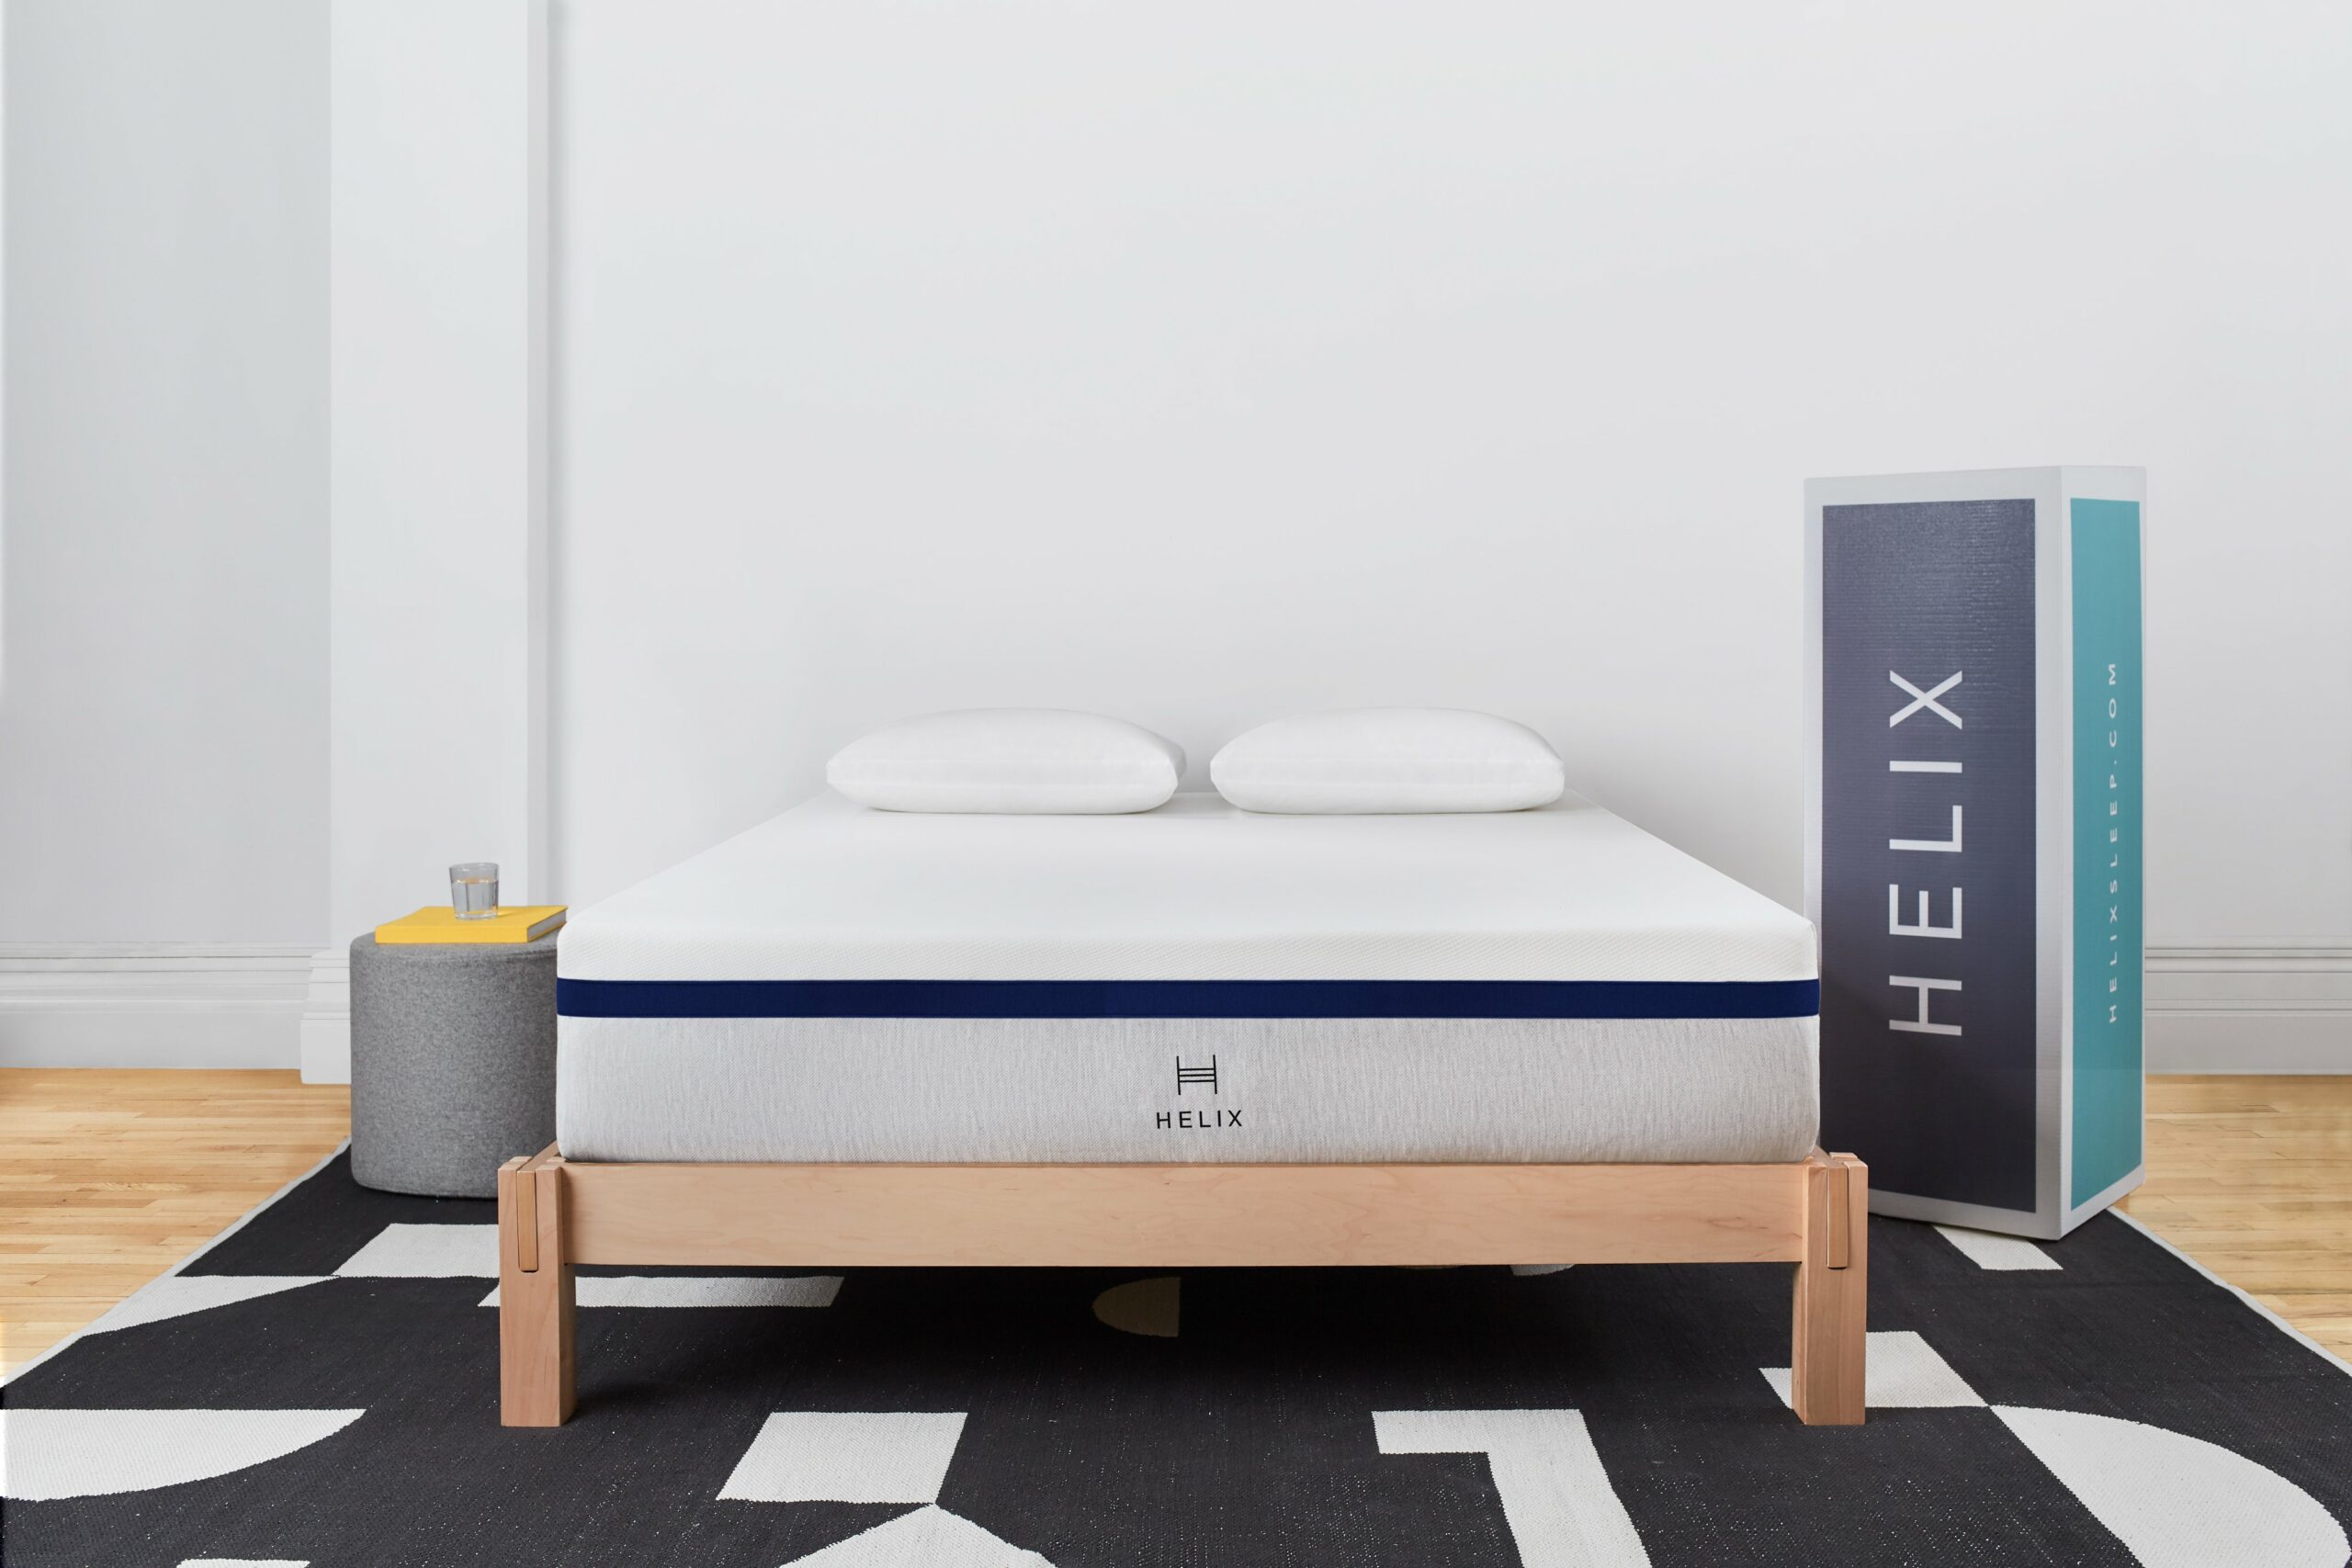 Additional Tips For Expanding A Helix Mattress